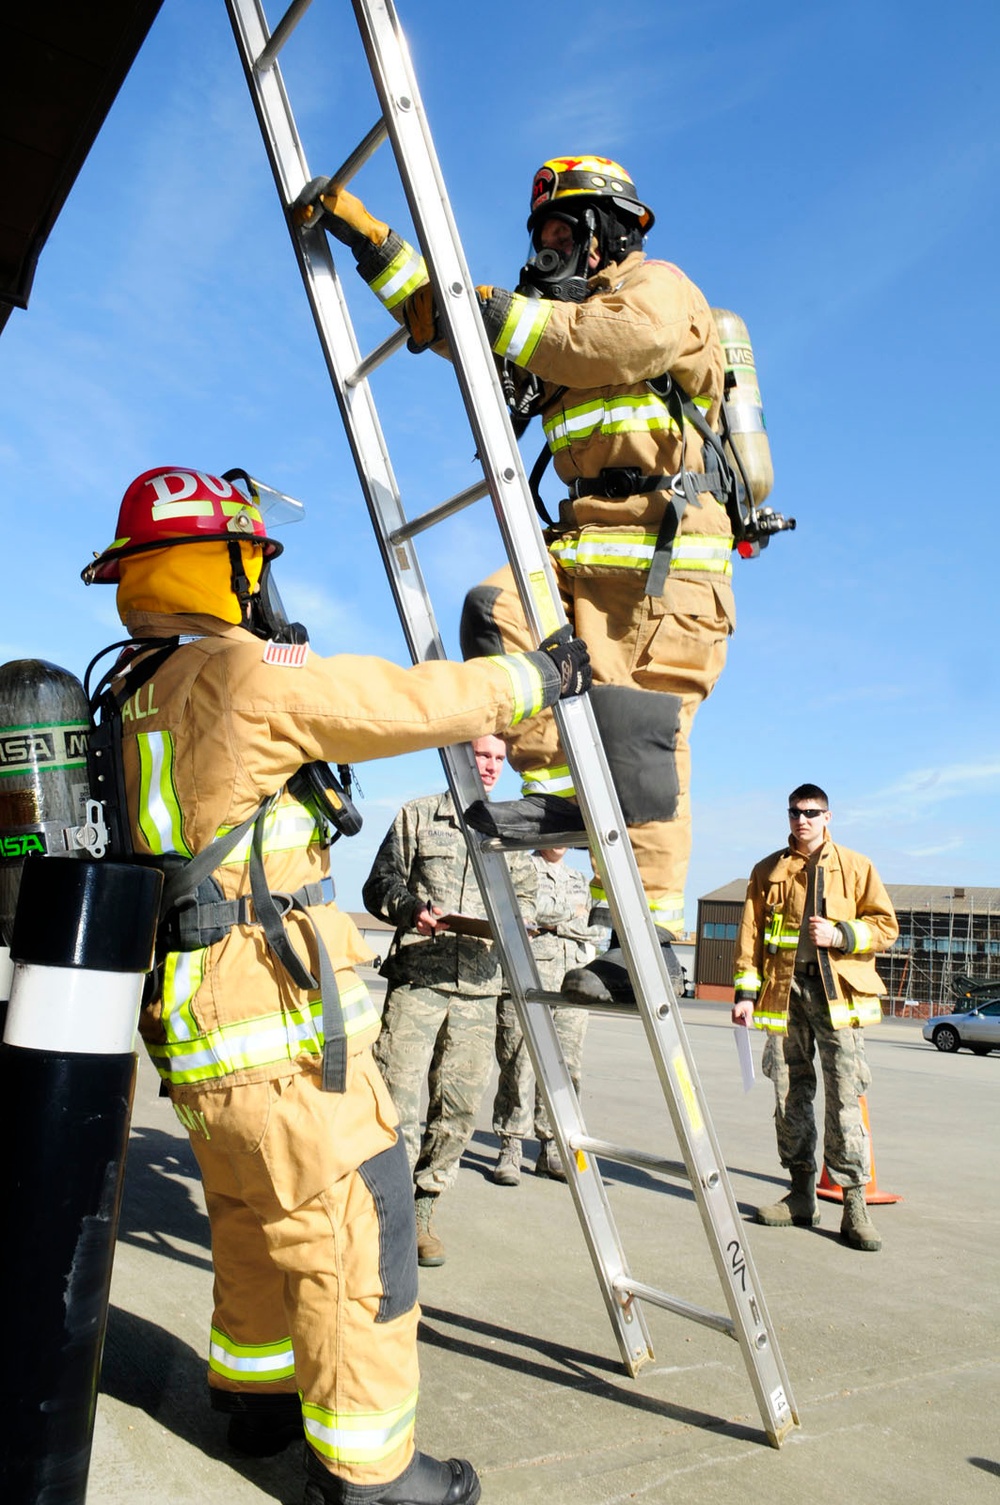 Breathe easy: Firefighters train on SCBA to ensure own, others lives kept safe